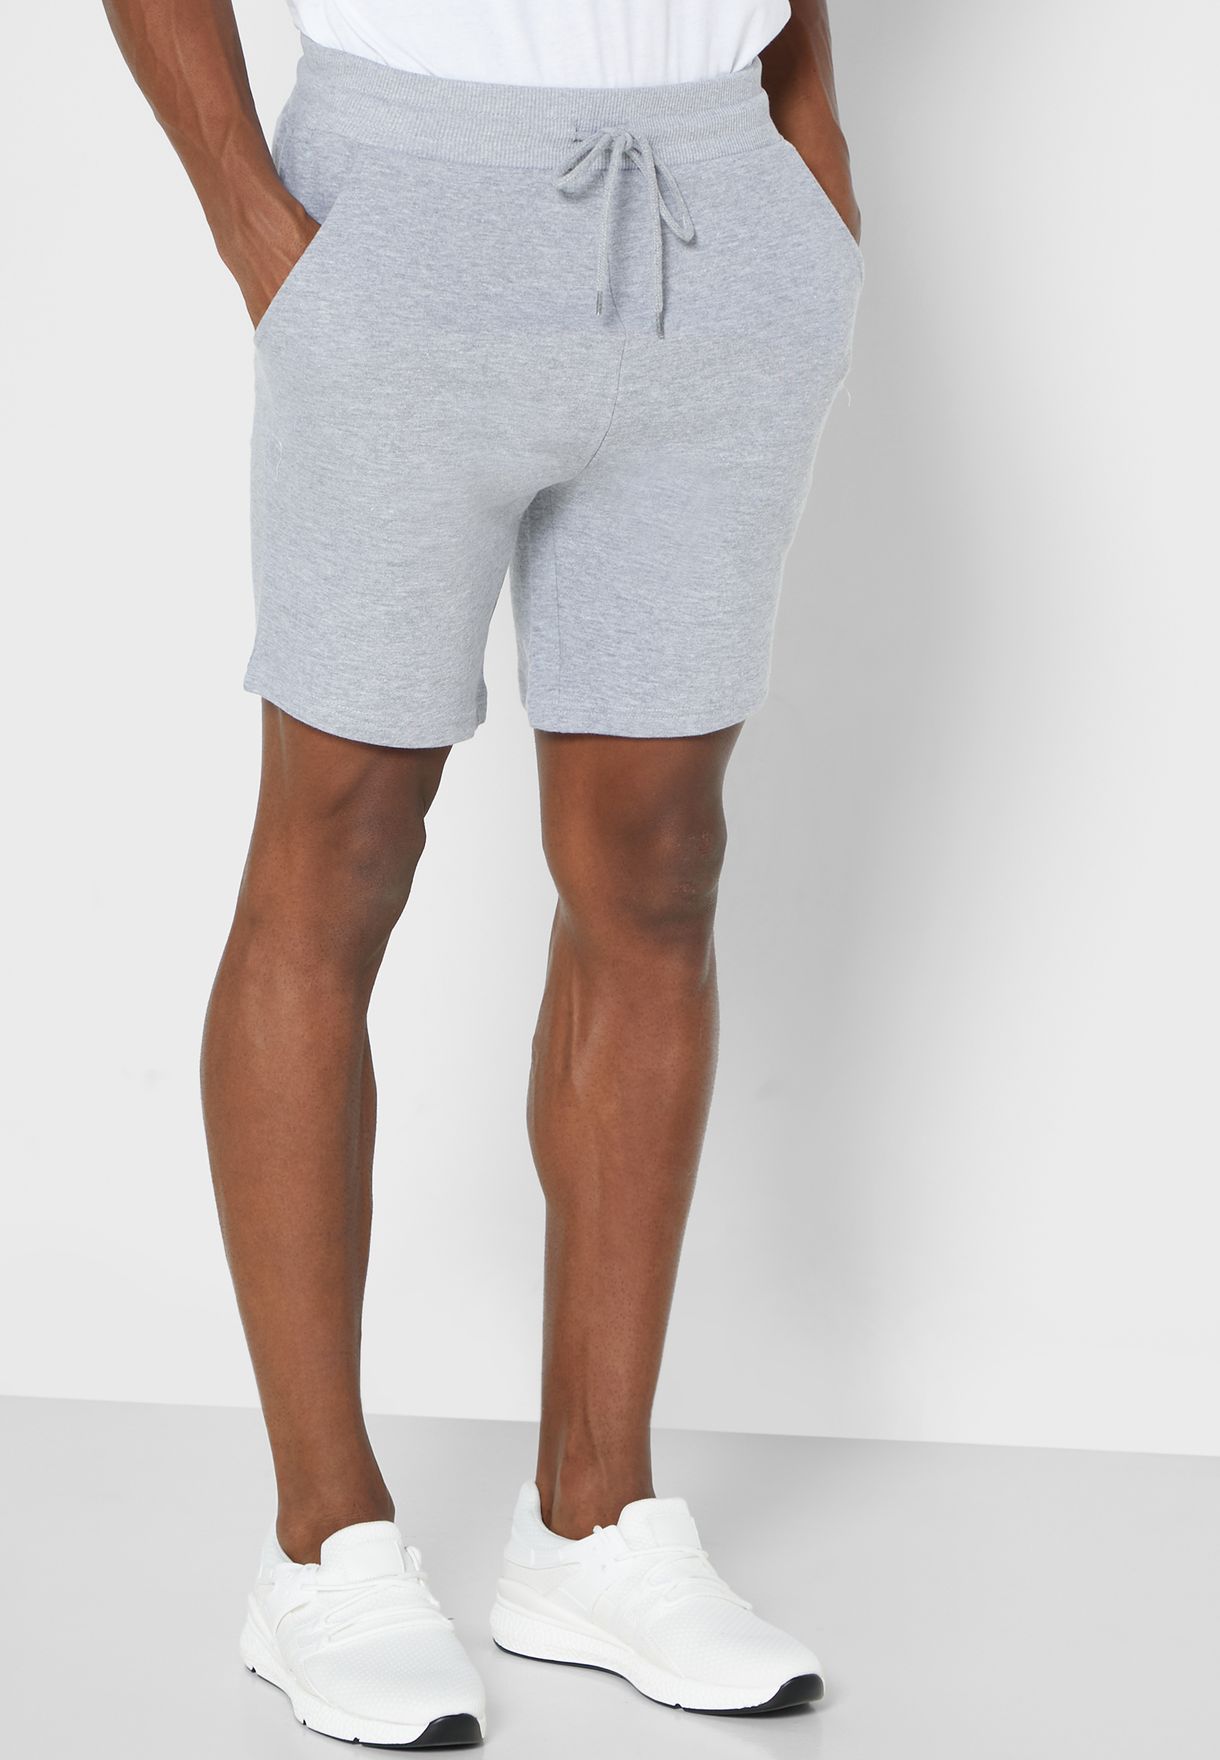 3 Pack Essential Lounge Shorts